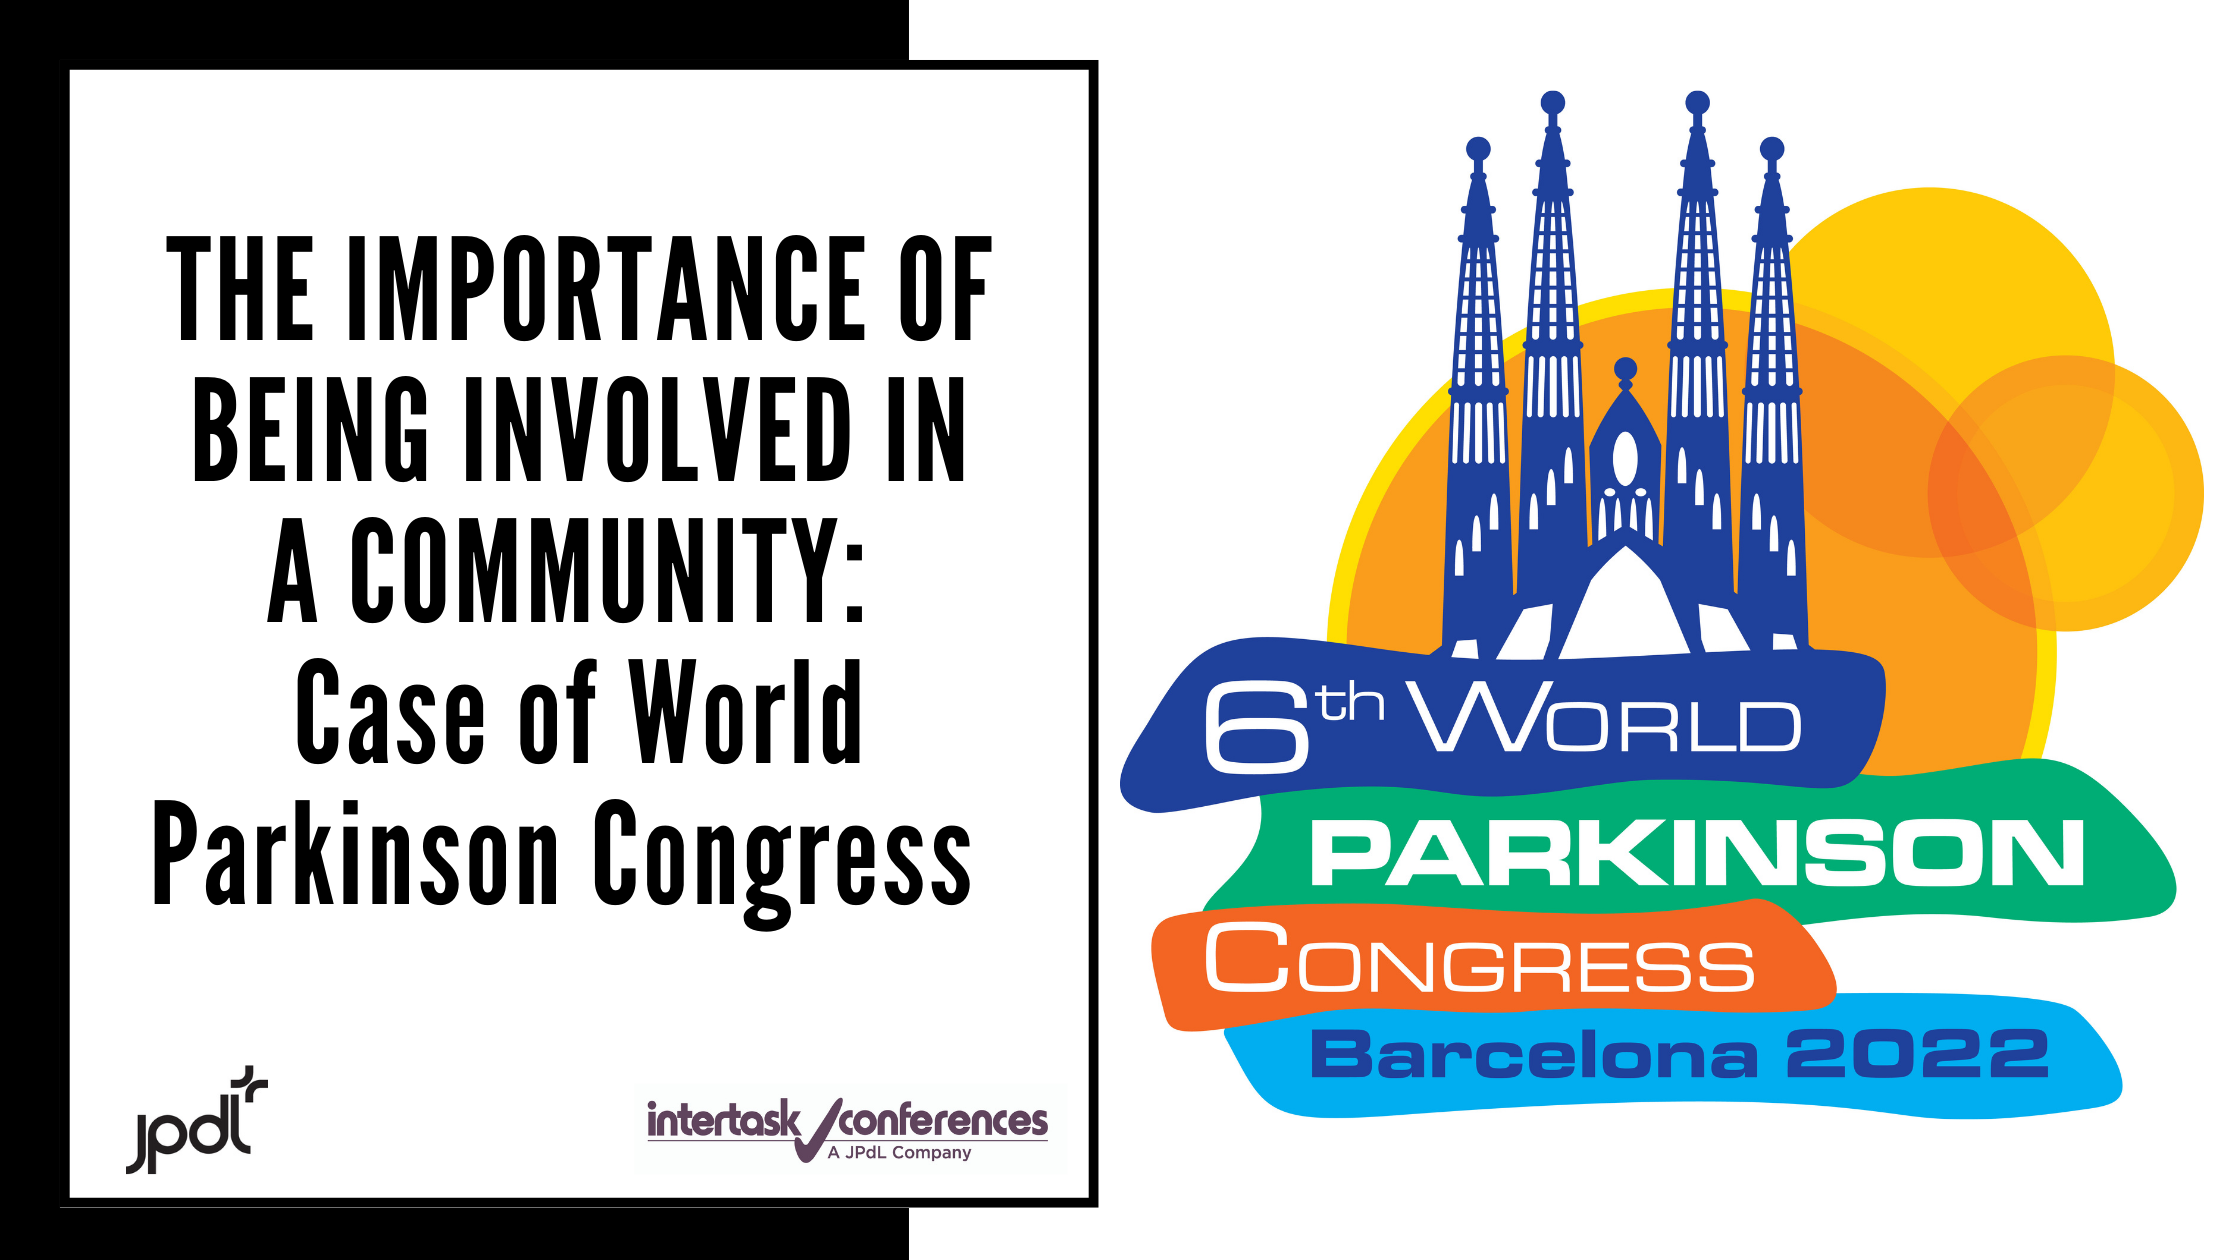 The importance of being involved in a community: Case of World Parkinson Congress